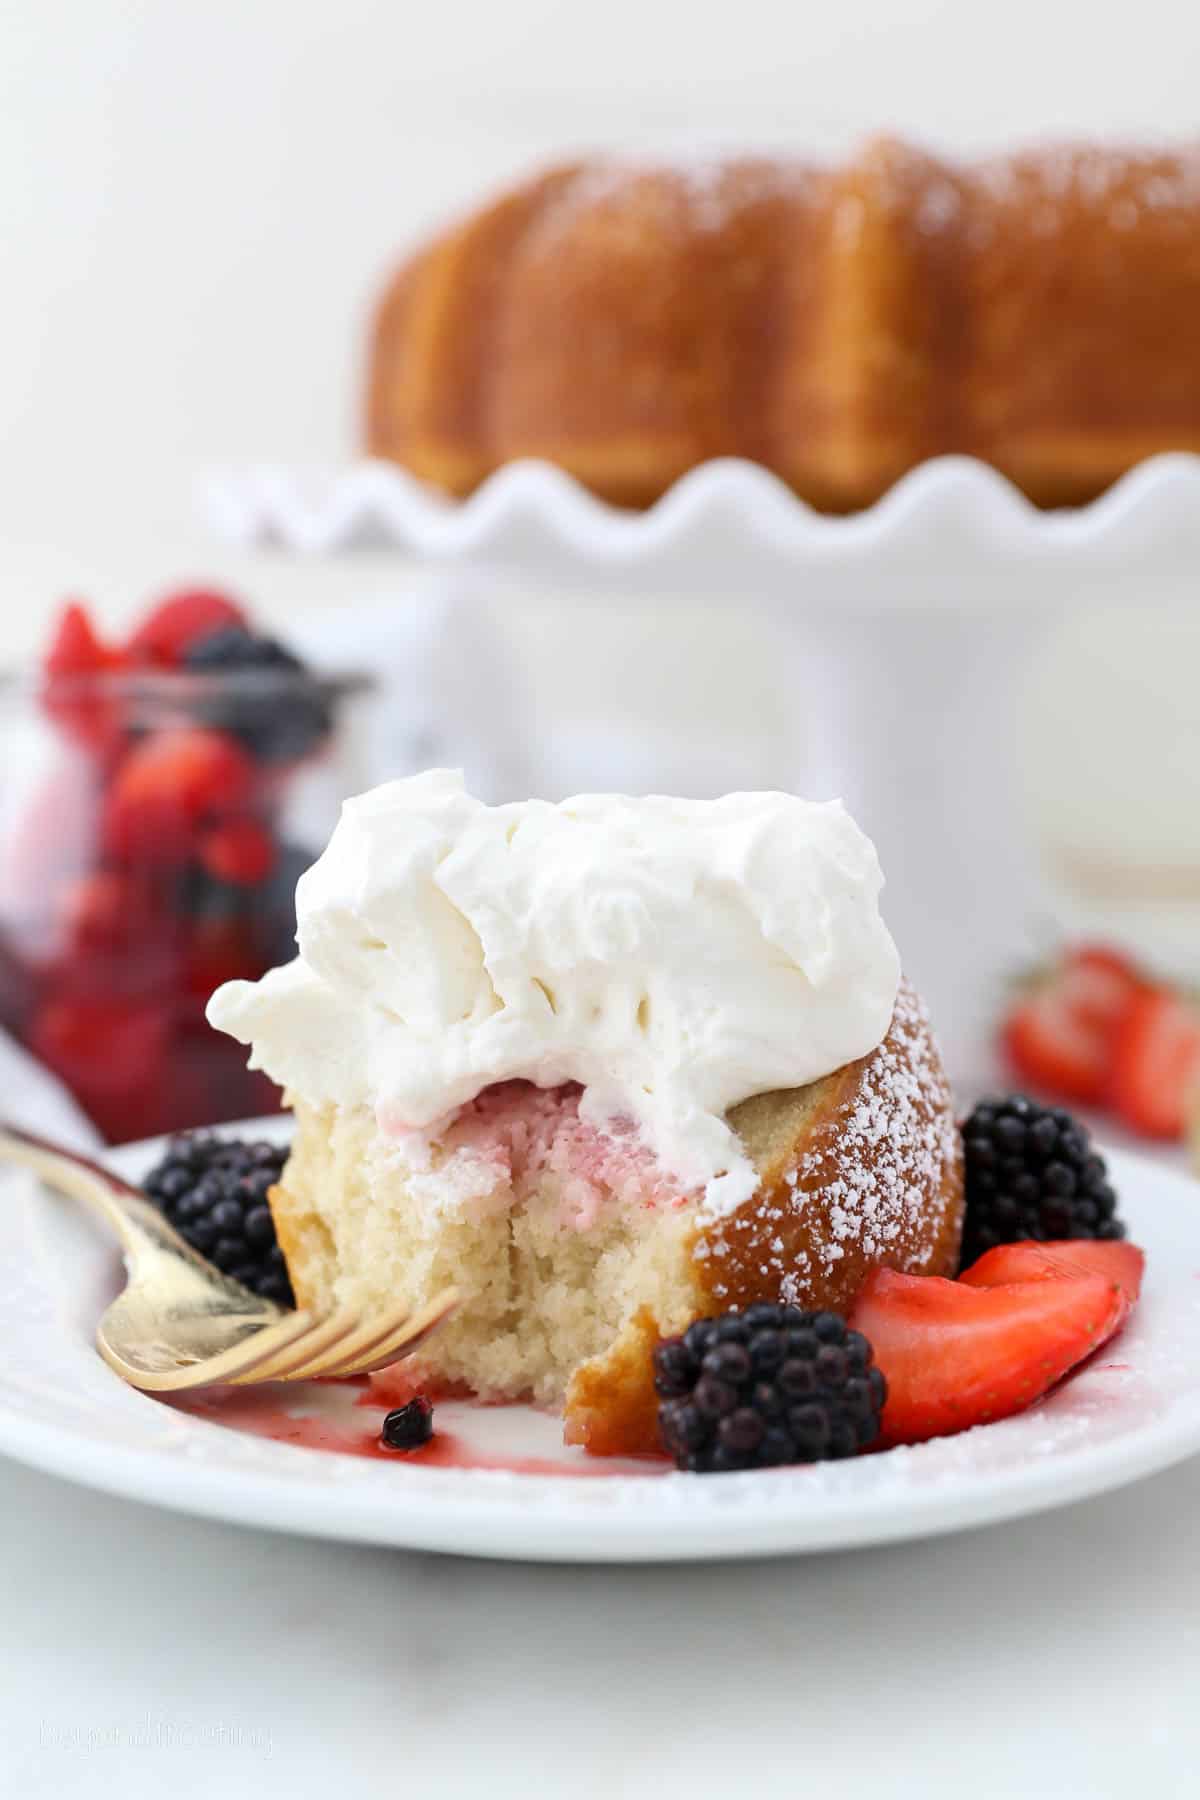 A slice of vanilla bundt cake on a white plate with a forkful missing, surrounded by macerated mixed berries and topped with whipped cream, with the rest of the cake on a cake stand in the background.